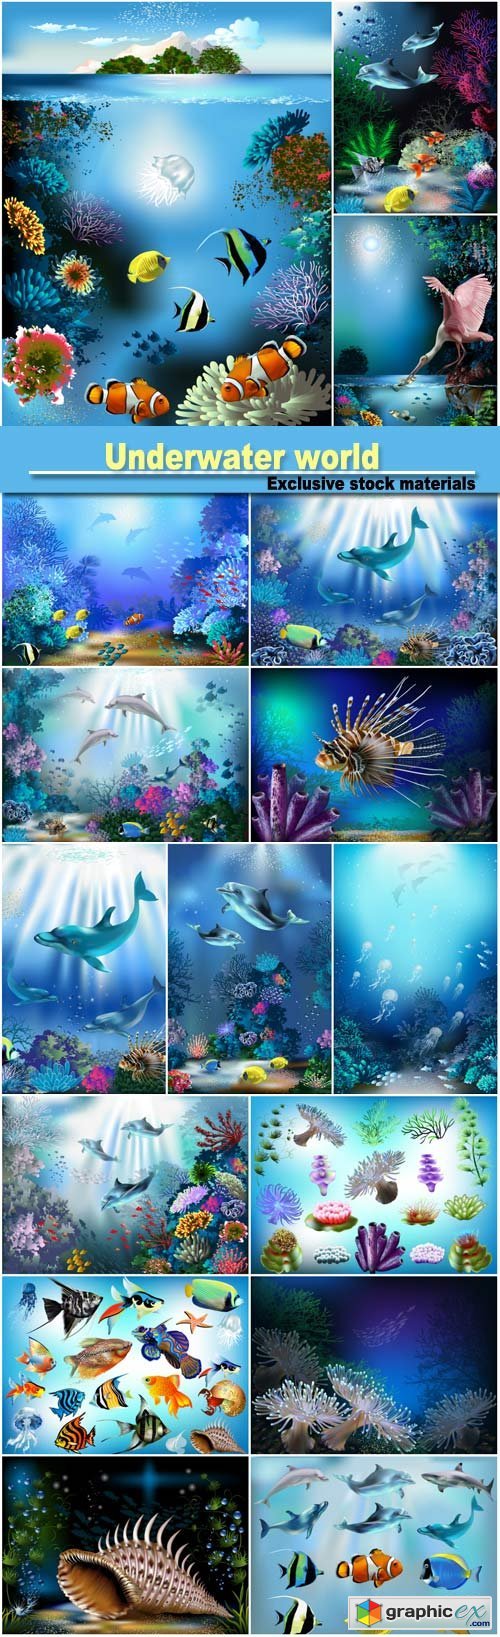 Underwater world, fish and dolphins